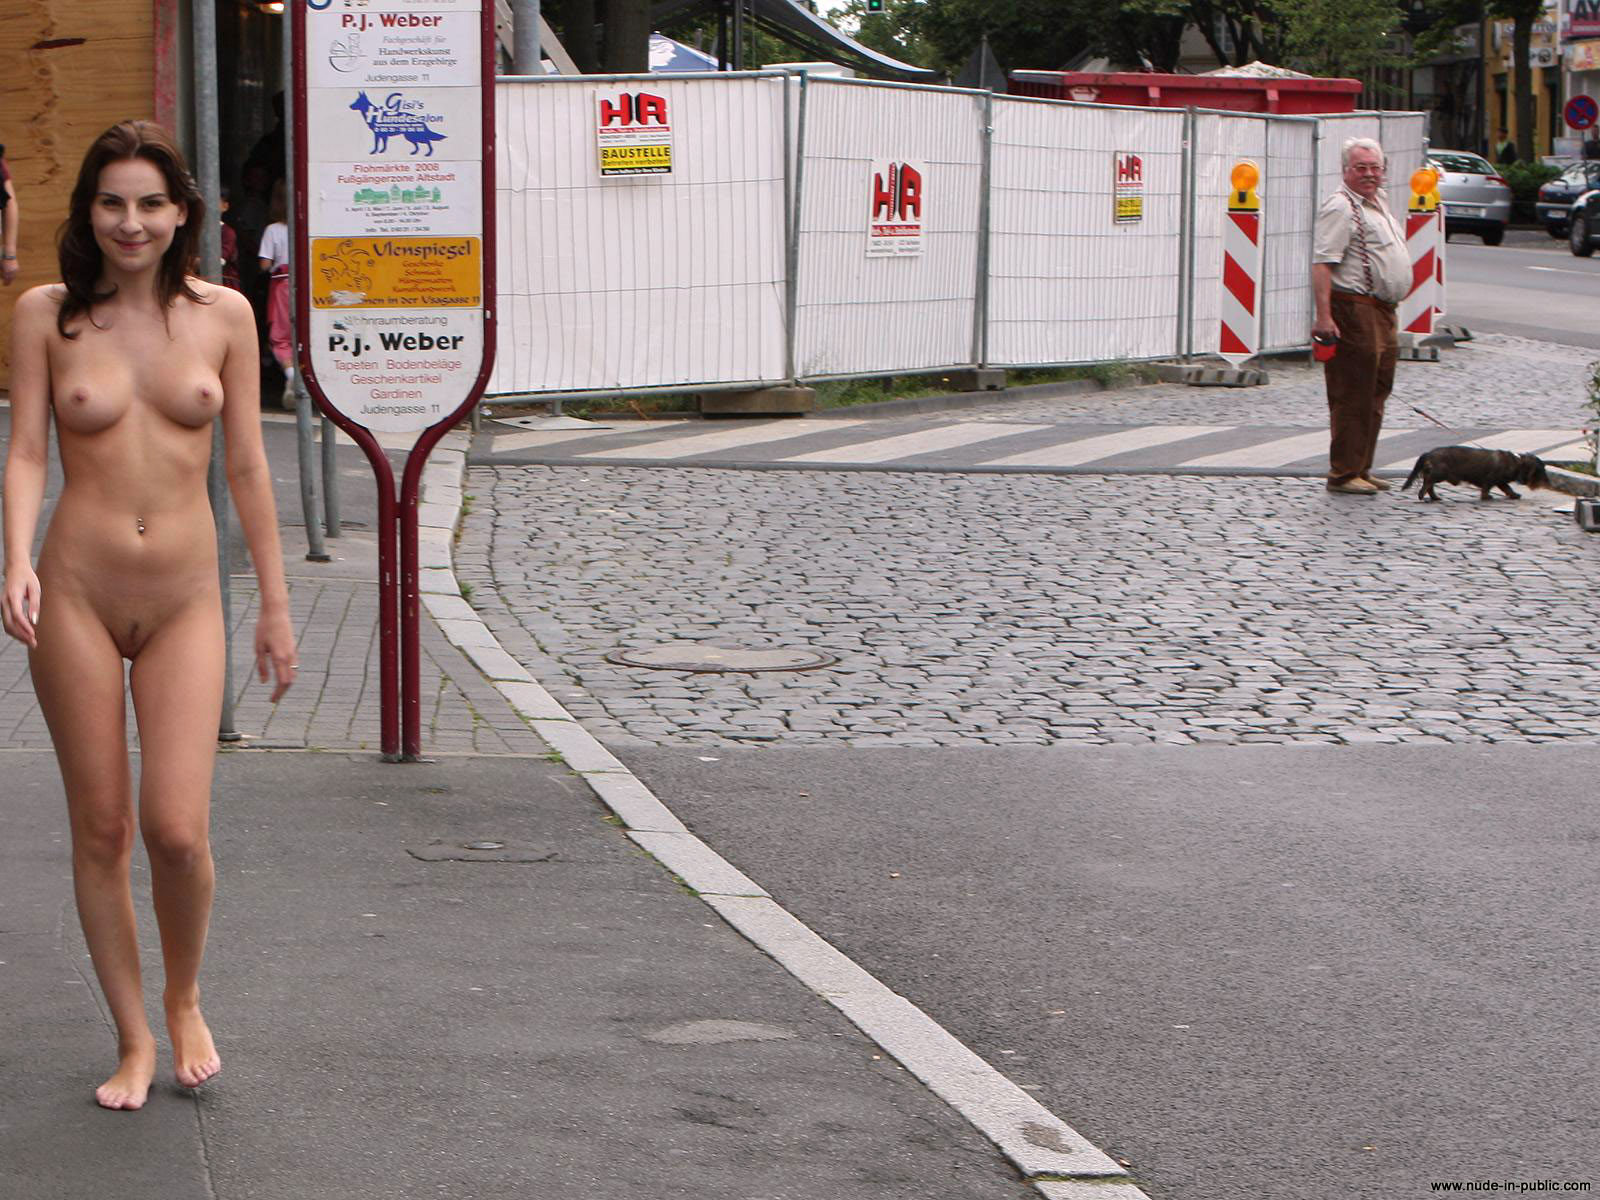 Shop Forced To Remove Poster Of Naked Woman Replaces It With Nude Man